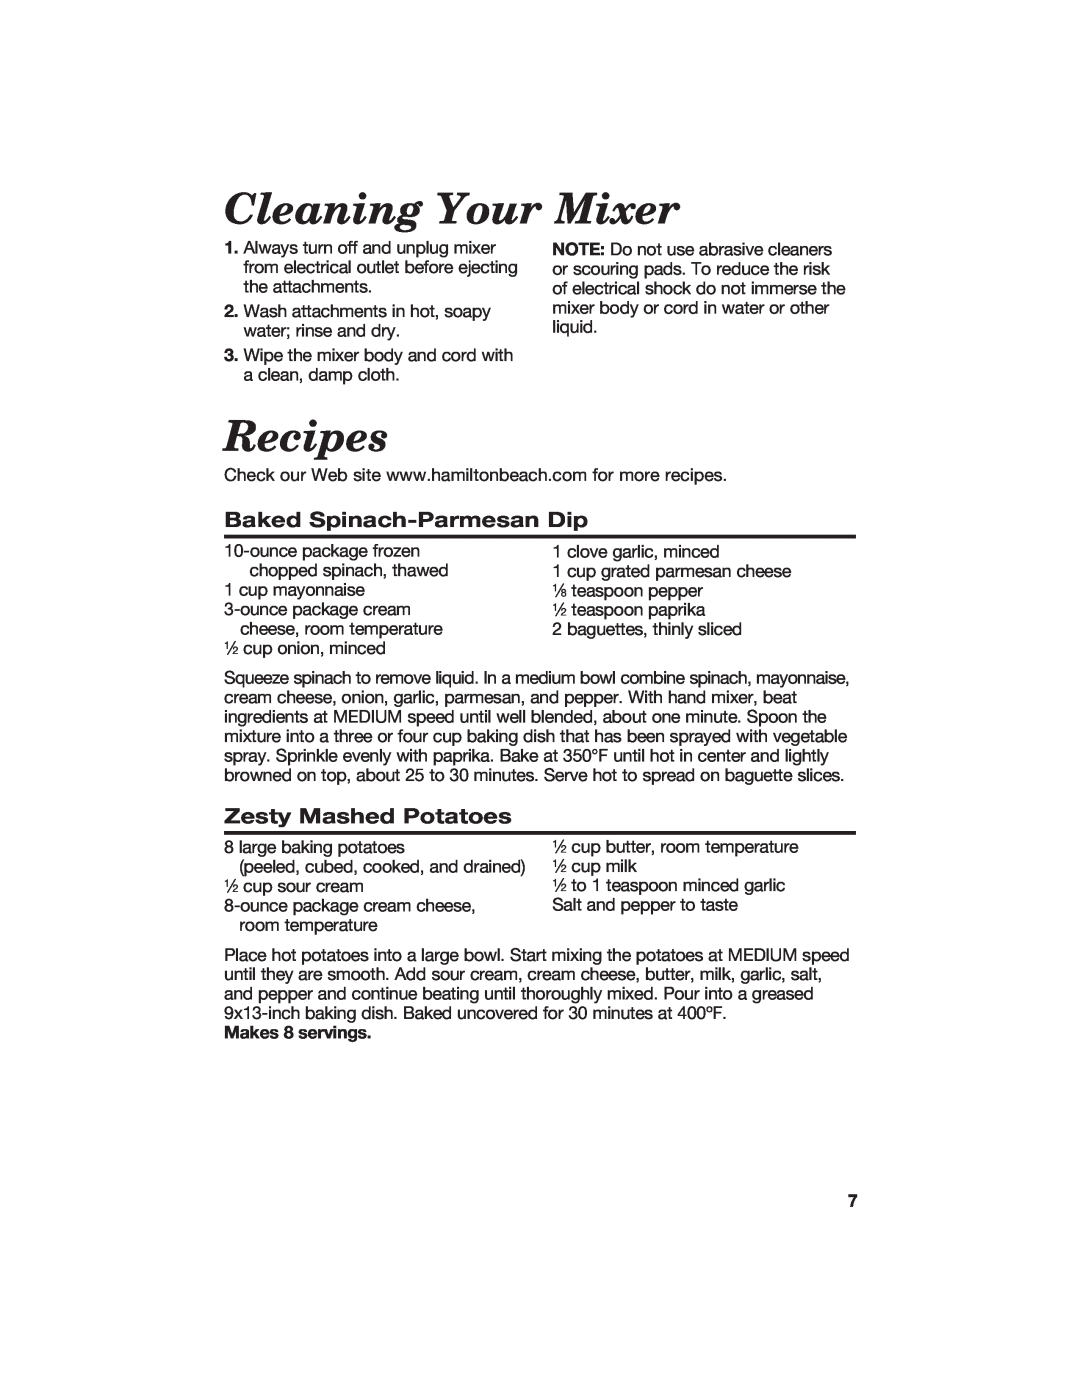 Hamilton Beach 840126200 Cleaning Your Mixer, Recipes, Baked Spinach-ParmesanDip, Zesty Mashed Potatoes, Makes 8 servings 